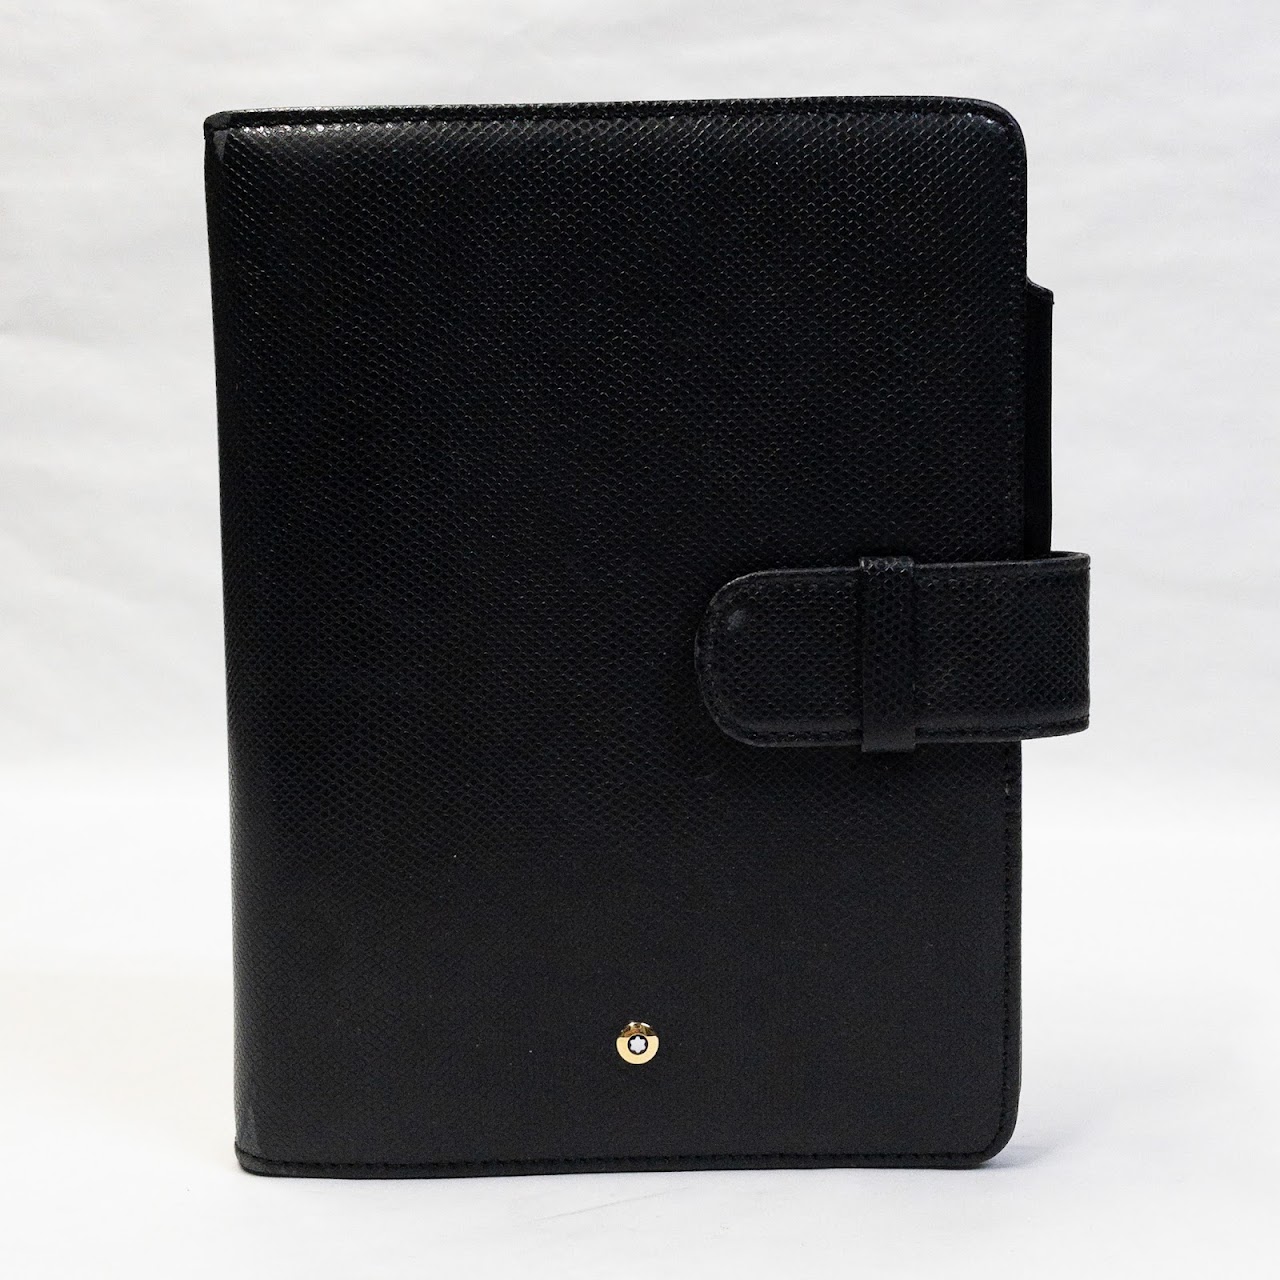 Montblanc Black & Red Leather Planner Cover